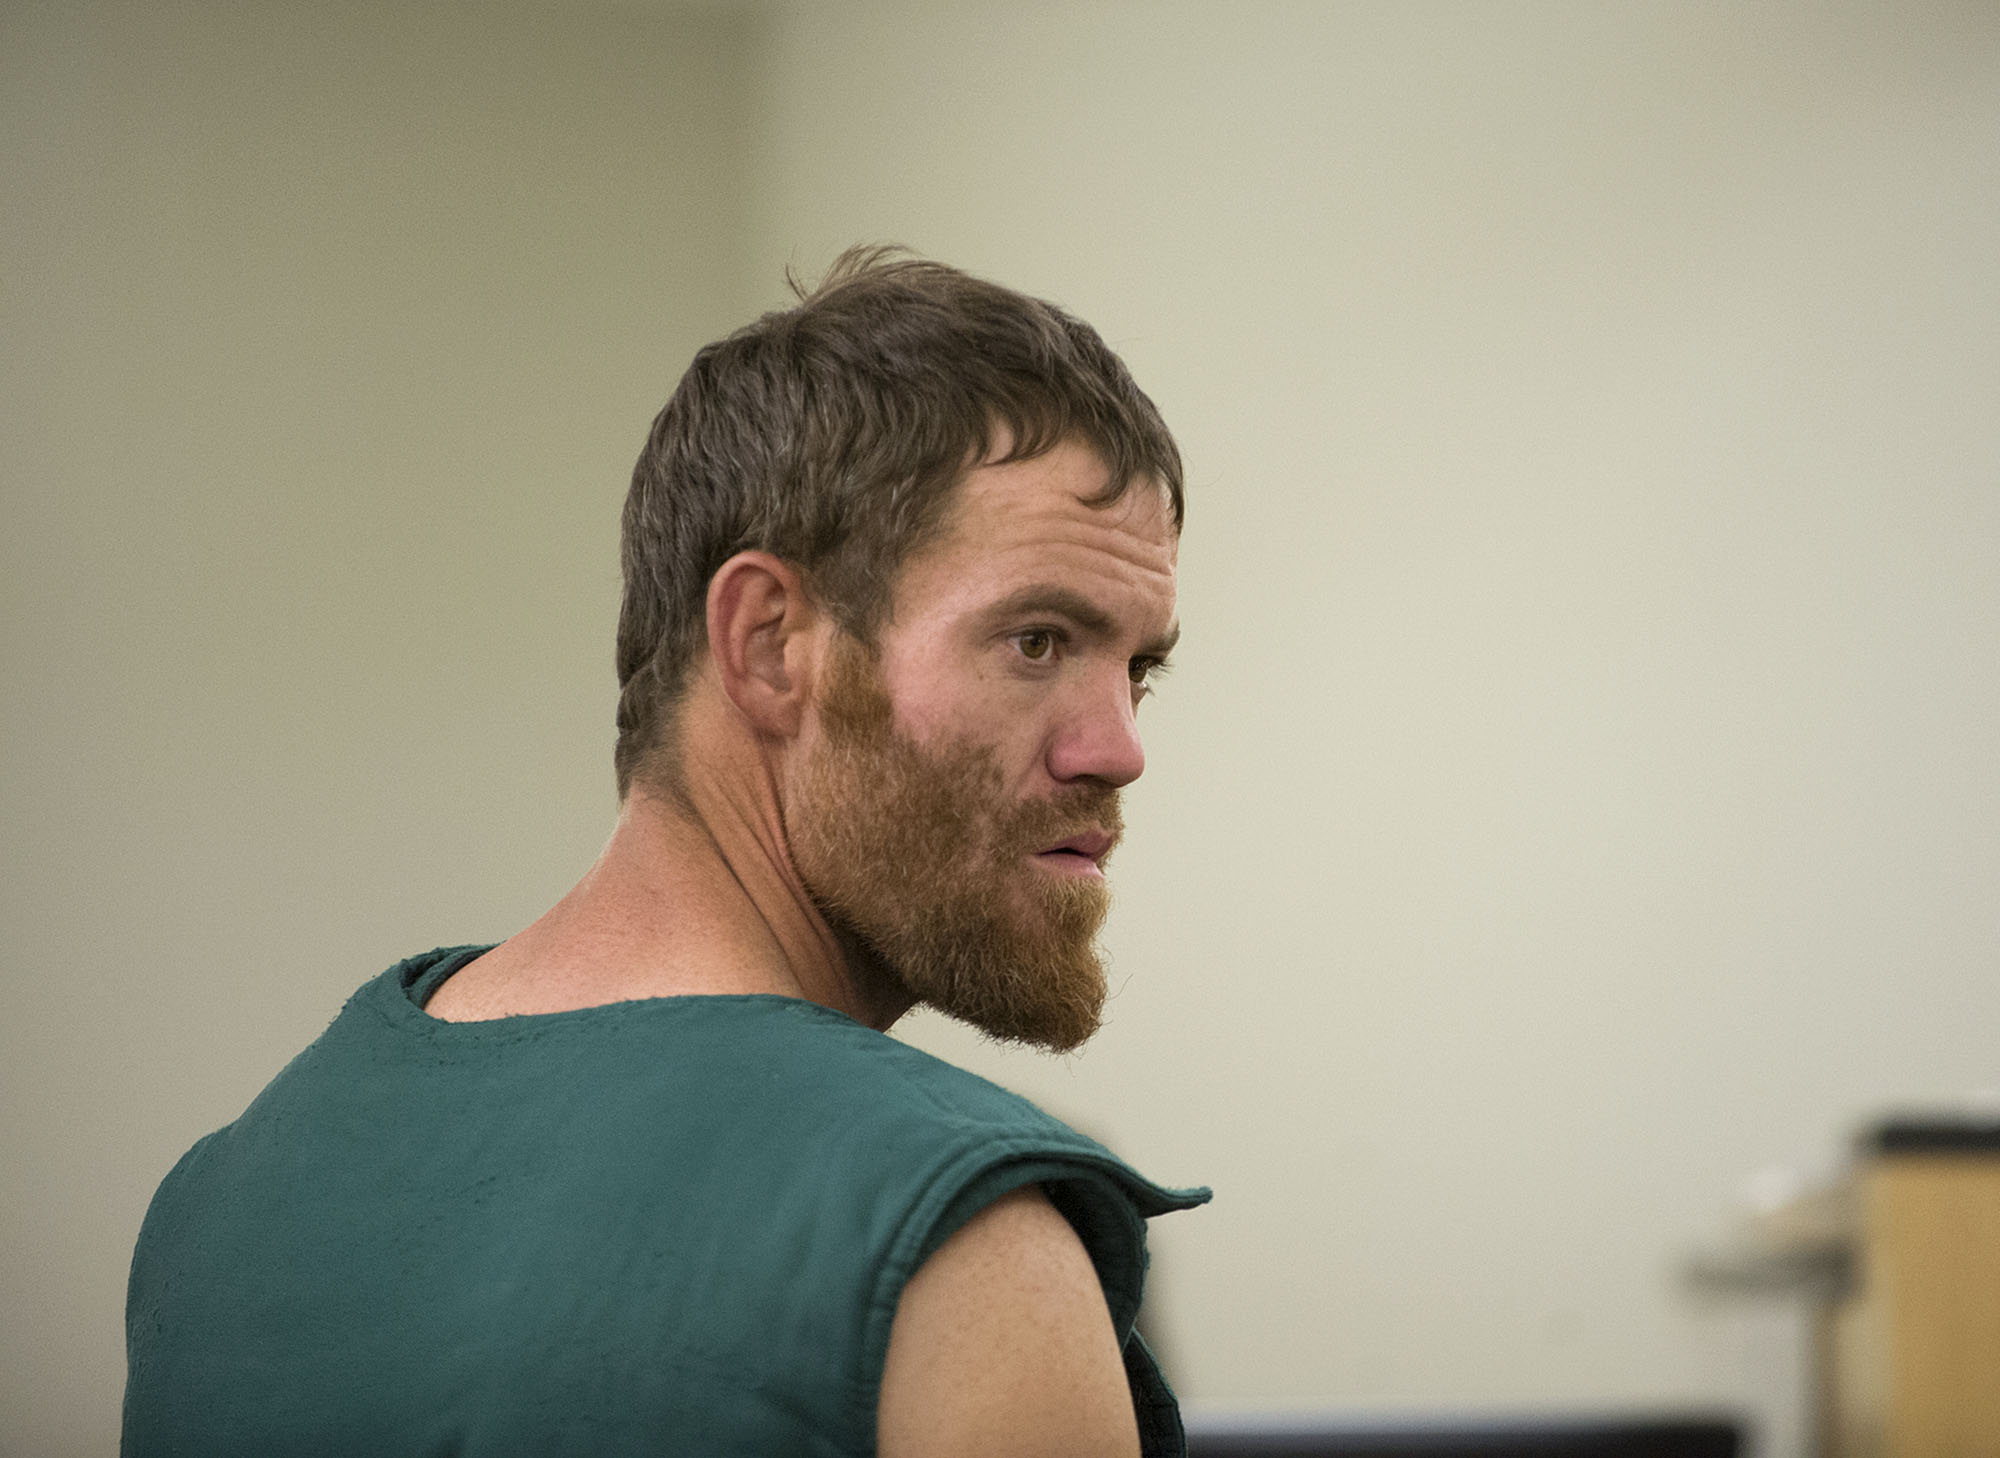 Shaun Michael Sprague, who opened fire inside the Hazel Dell Wal-Mart, makes a first appearance Oct. 6, 2016, in Clark County Superior. Sprague was sentenced Thursday to a total of 16 months in the Clark County Jail.